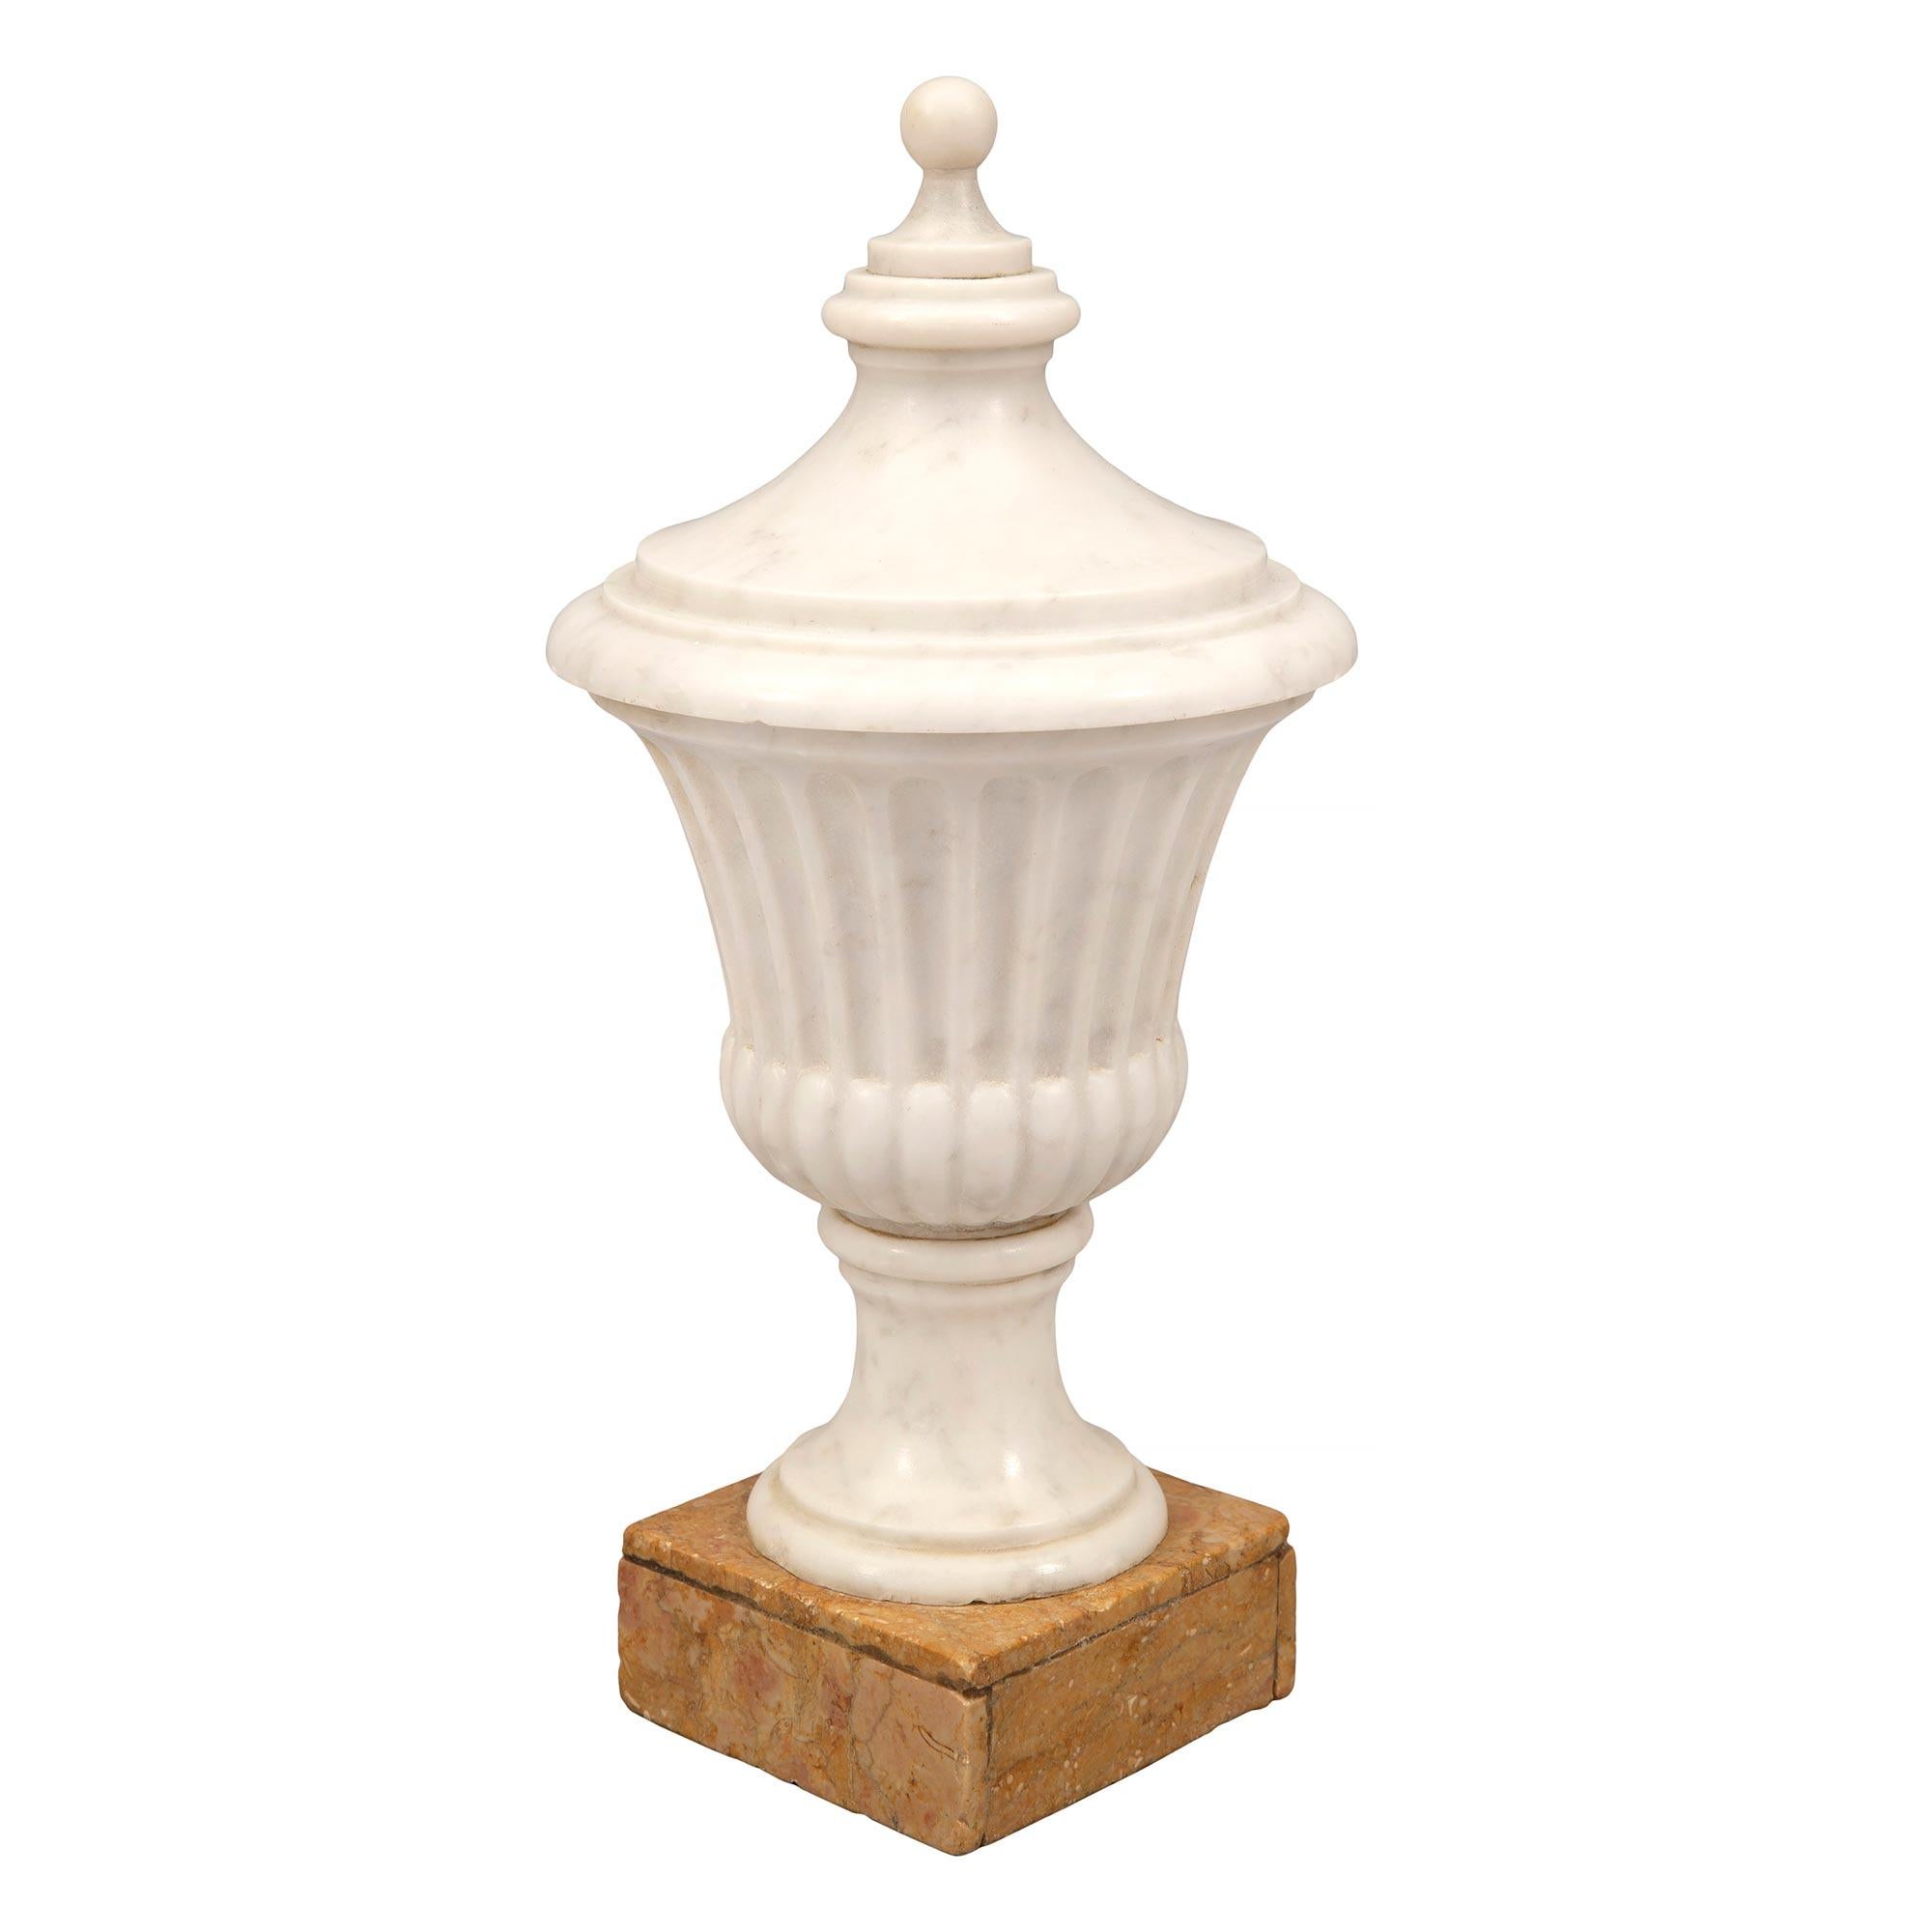 A lovely pair of Italian mid 19th century neo-classical st. decorative white Carrara and Sienna marble urns. Each urn is raised by a square Sienna marble base below the circular mottled socle pedestal. The white Carrara marble urn displays a fine